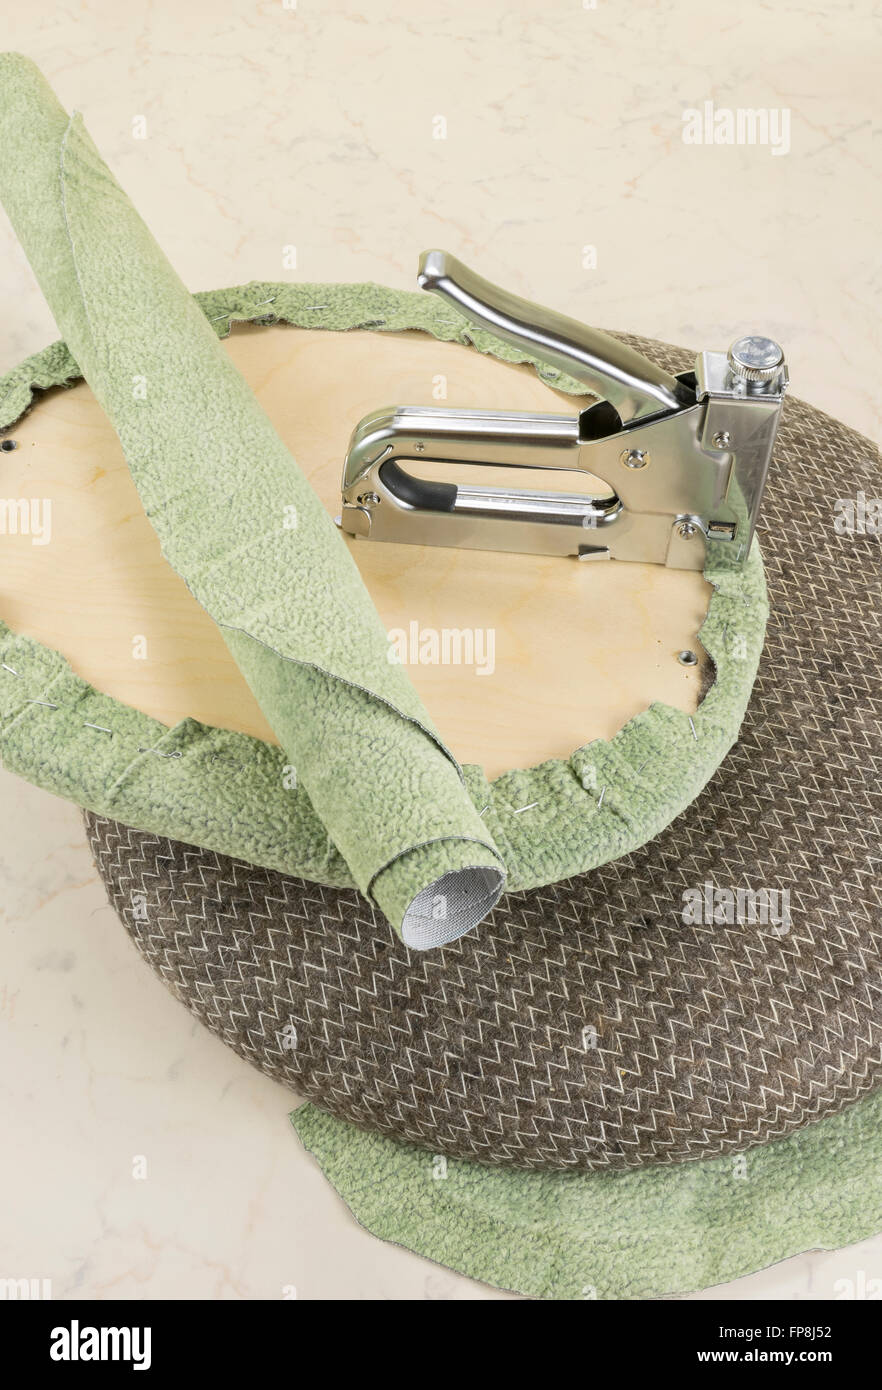 upholstering a part of chair by staple gun Stock Photo